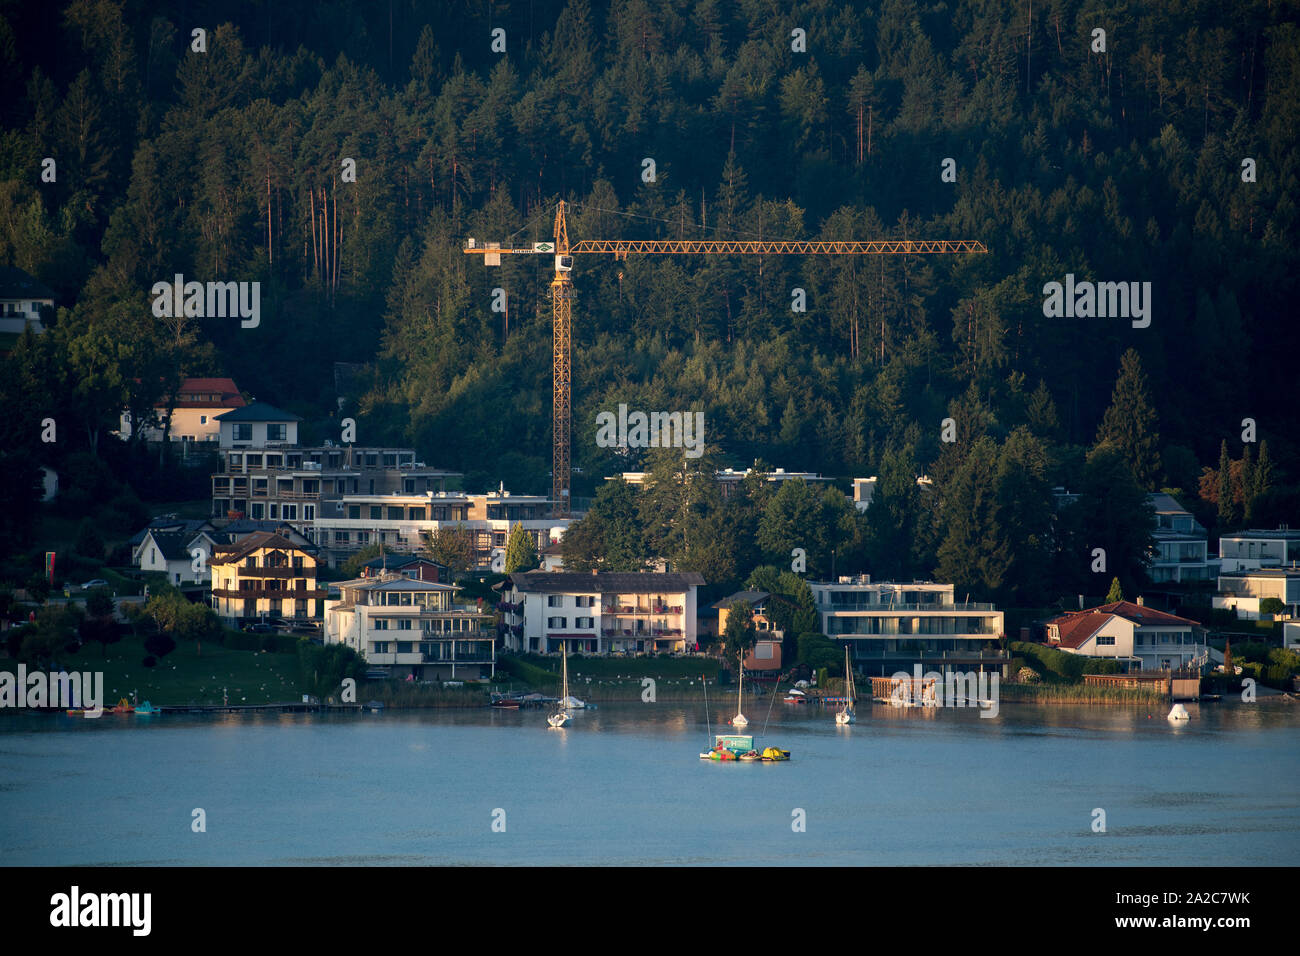 Velden am Wörther See and Worthersee (Lake Worth) seen from Techelsberg am Worther See, Carinthia, Austria. August 17th 2019 © Wojciech Strozyk / Alam Stock Photo